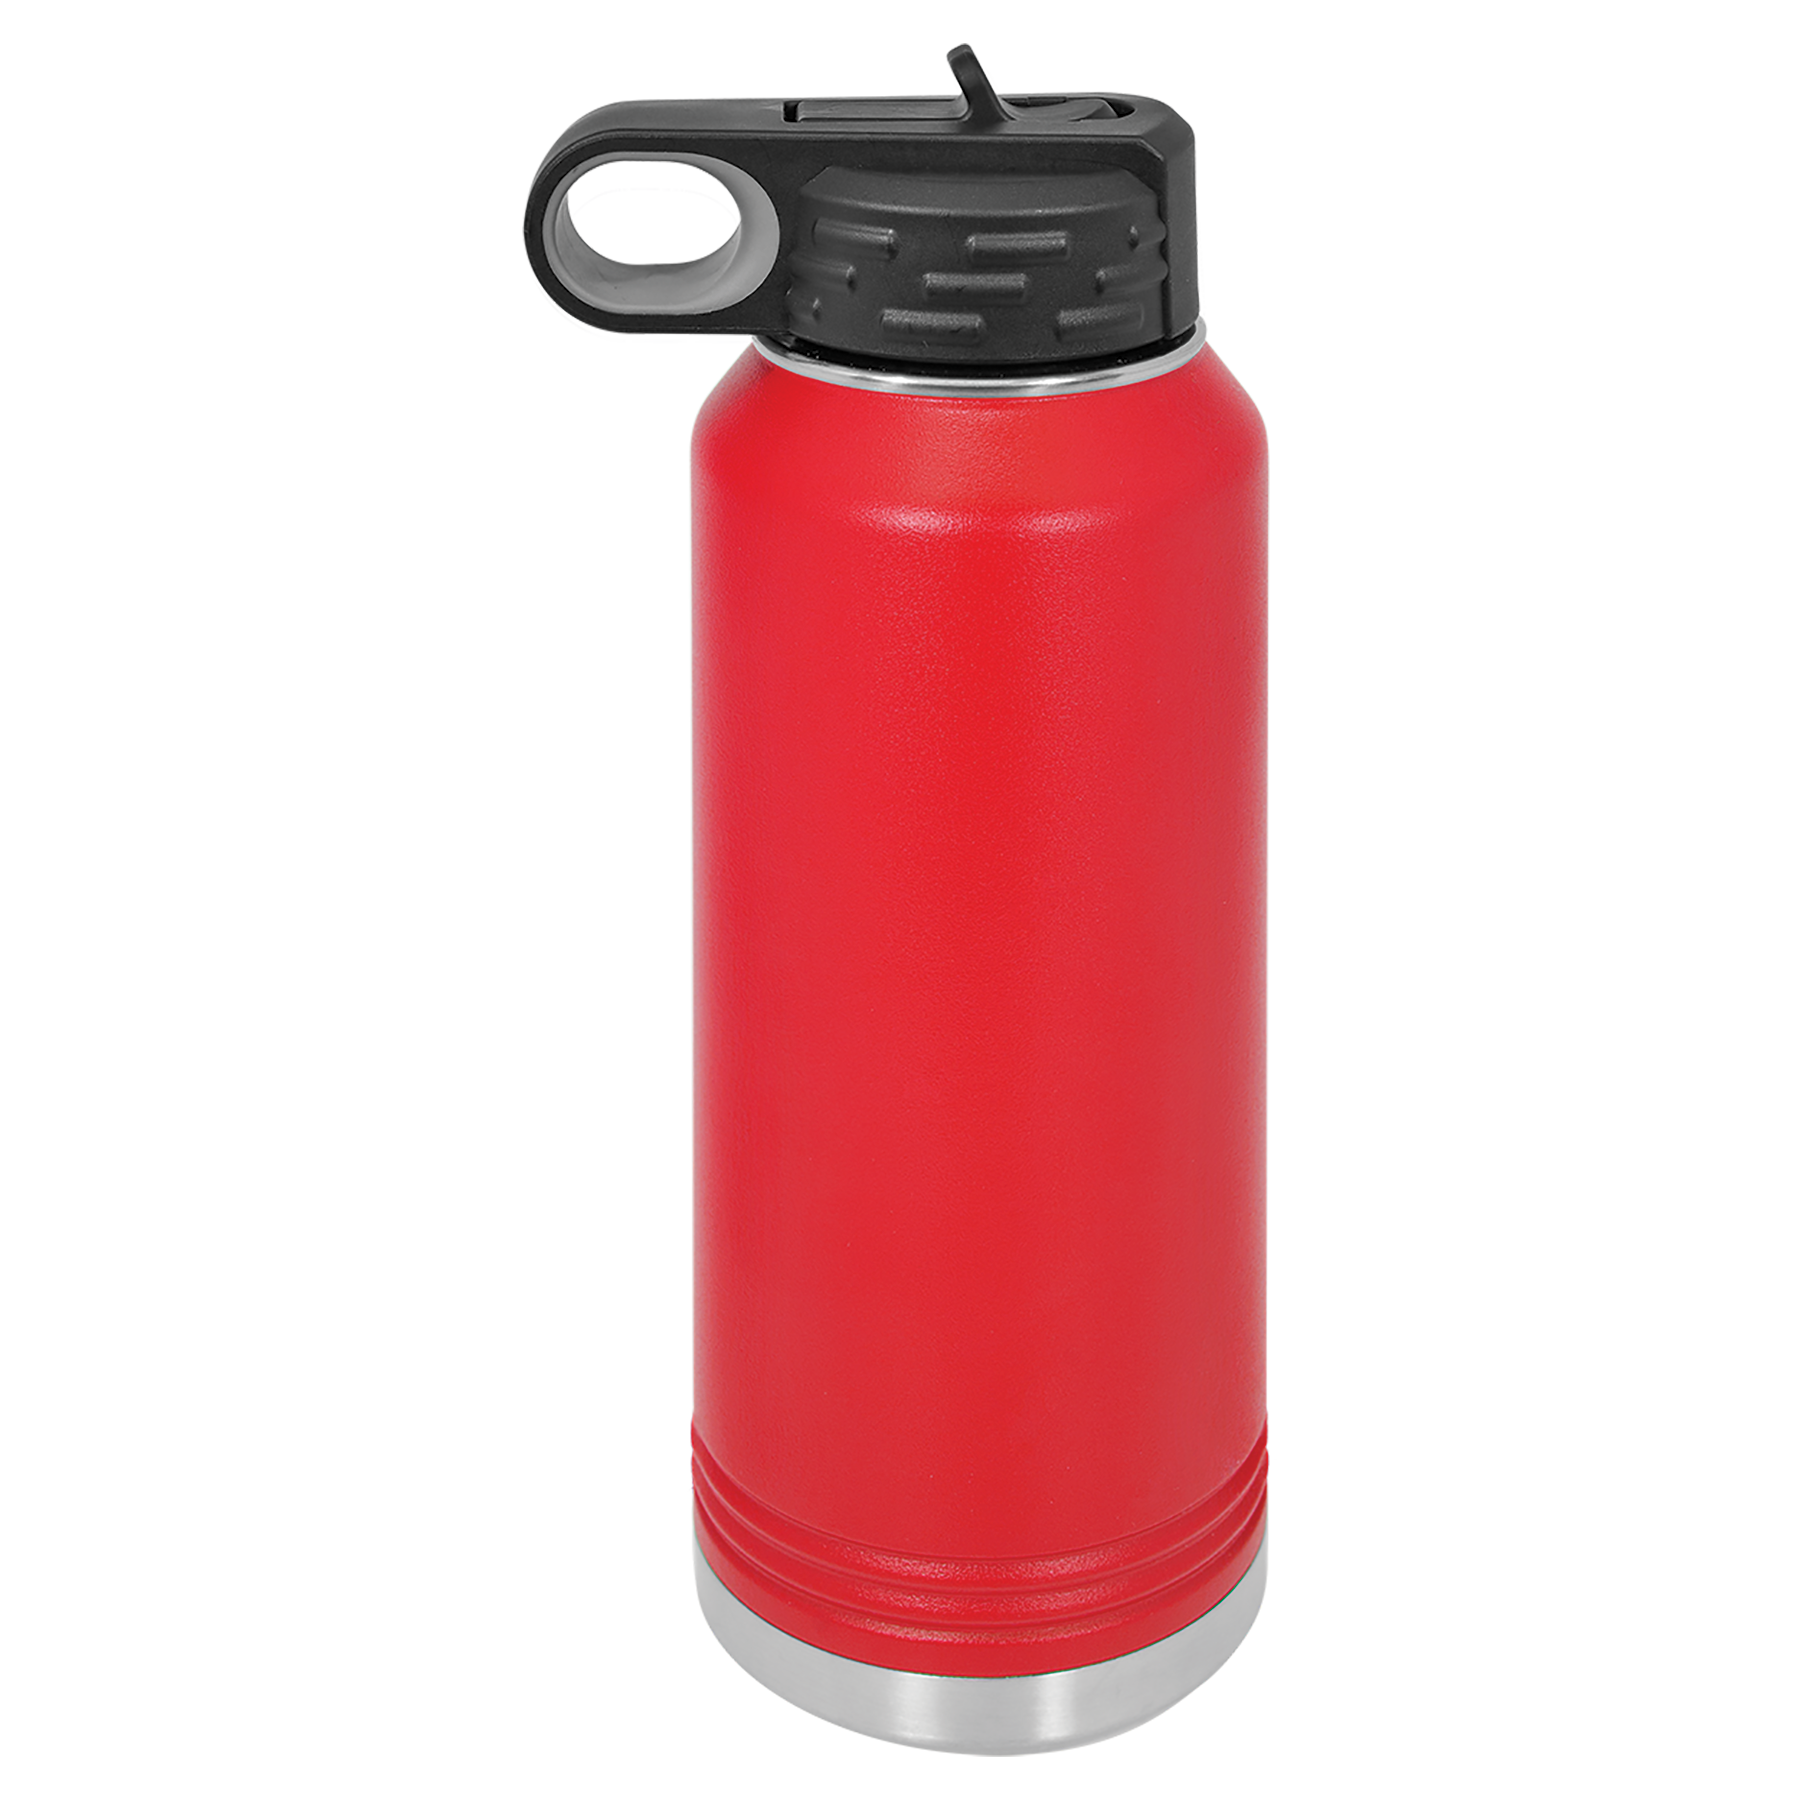 Red 32oz Water Bottle -One Free Engraving   -Double-wall Vacuum Insulated  -Made from 18/8 Gauge Stainless Steel (Type 304 Food Grade)  -Lid is BPA Free (Hand Wash Only)  -Not recommended for Dishwasher  -Works with Cold and Hot Drinks  -18 Color Options  -Perfect for Personalized Gifts, Awards, Incentives, Swag & Fundraisers